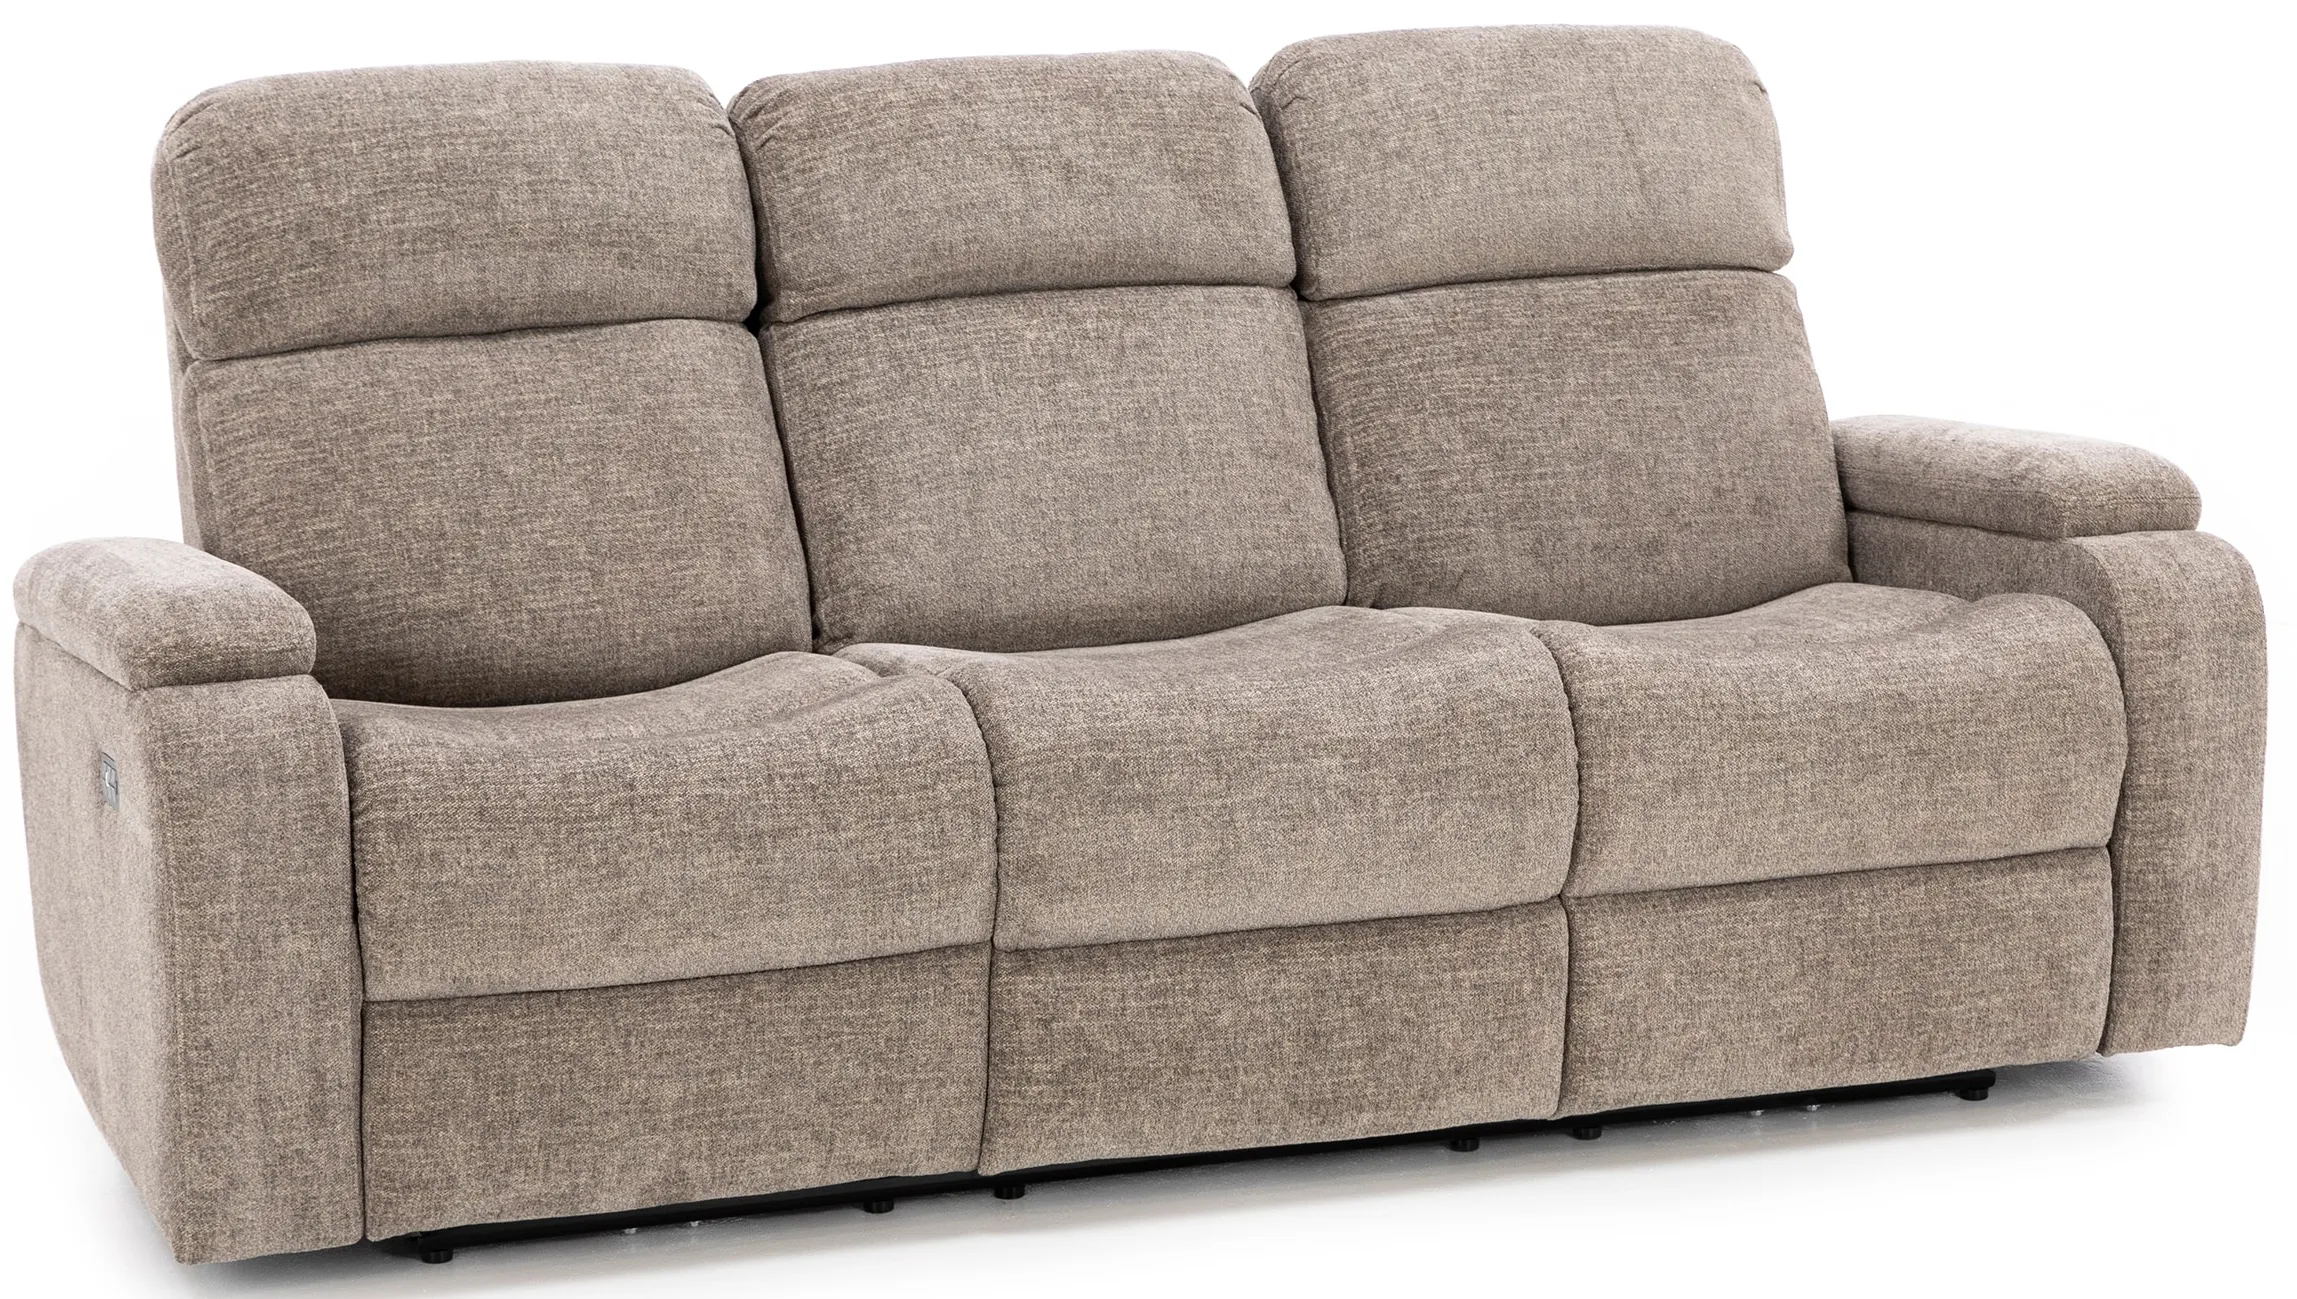 Infinity Fully Loaded Reclining Sofa With Drop Down Table